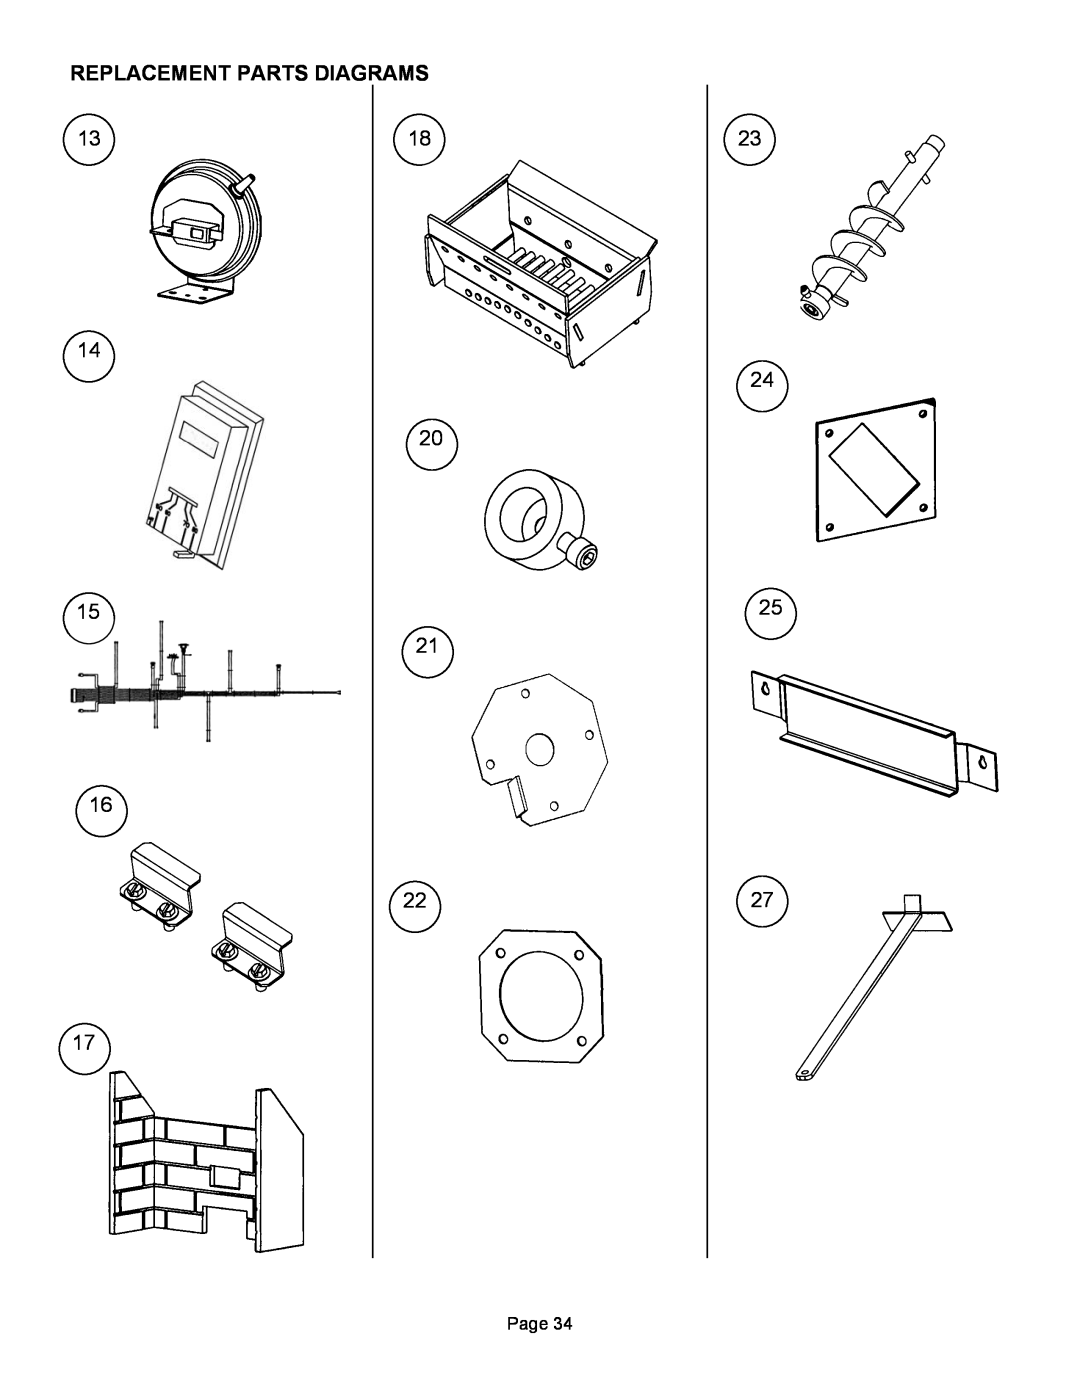 Lennox Hearth T300P operation manual 14 20 15, Replacement Parts Diagrams, Page 